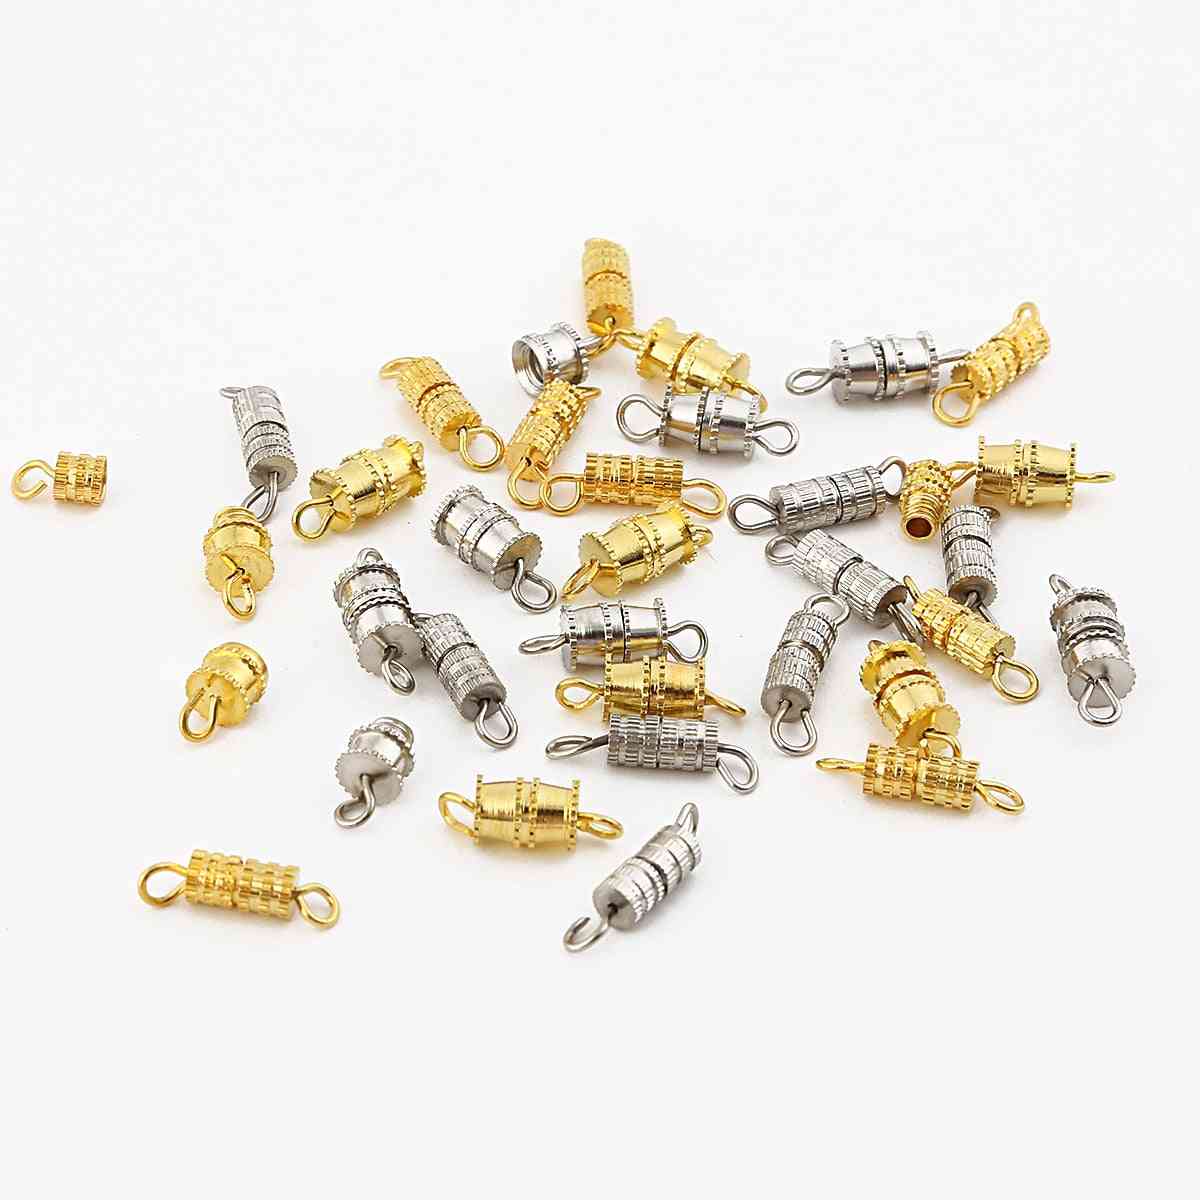 Cylinder Fasteners Buckles- Closed Beading End, Screw Clasps